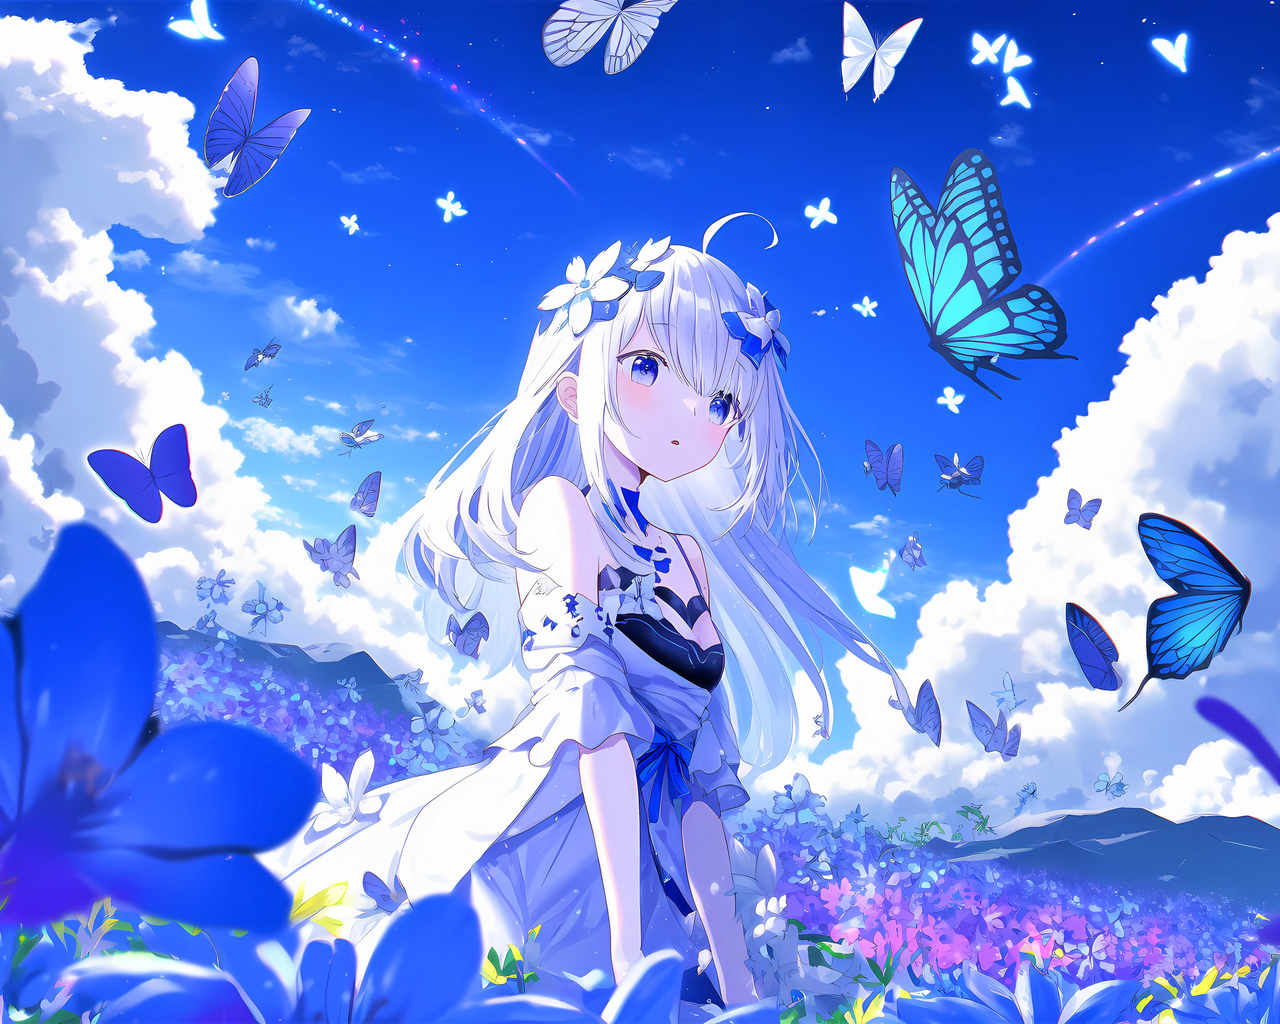 Download Anime girl, Butterflies, Young woman, Anime Wallpaper in 1280x1024 Resolution